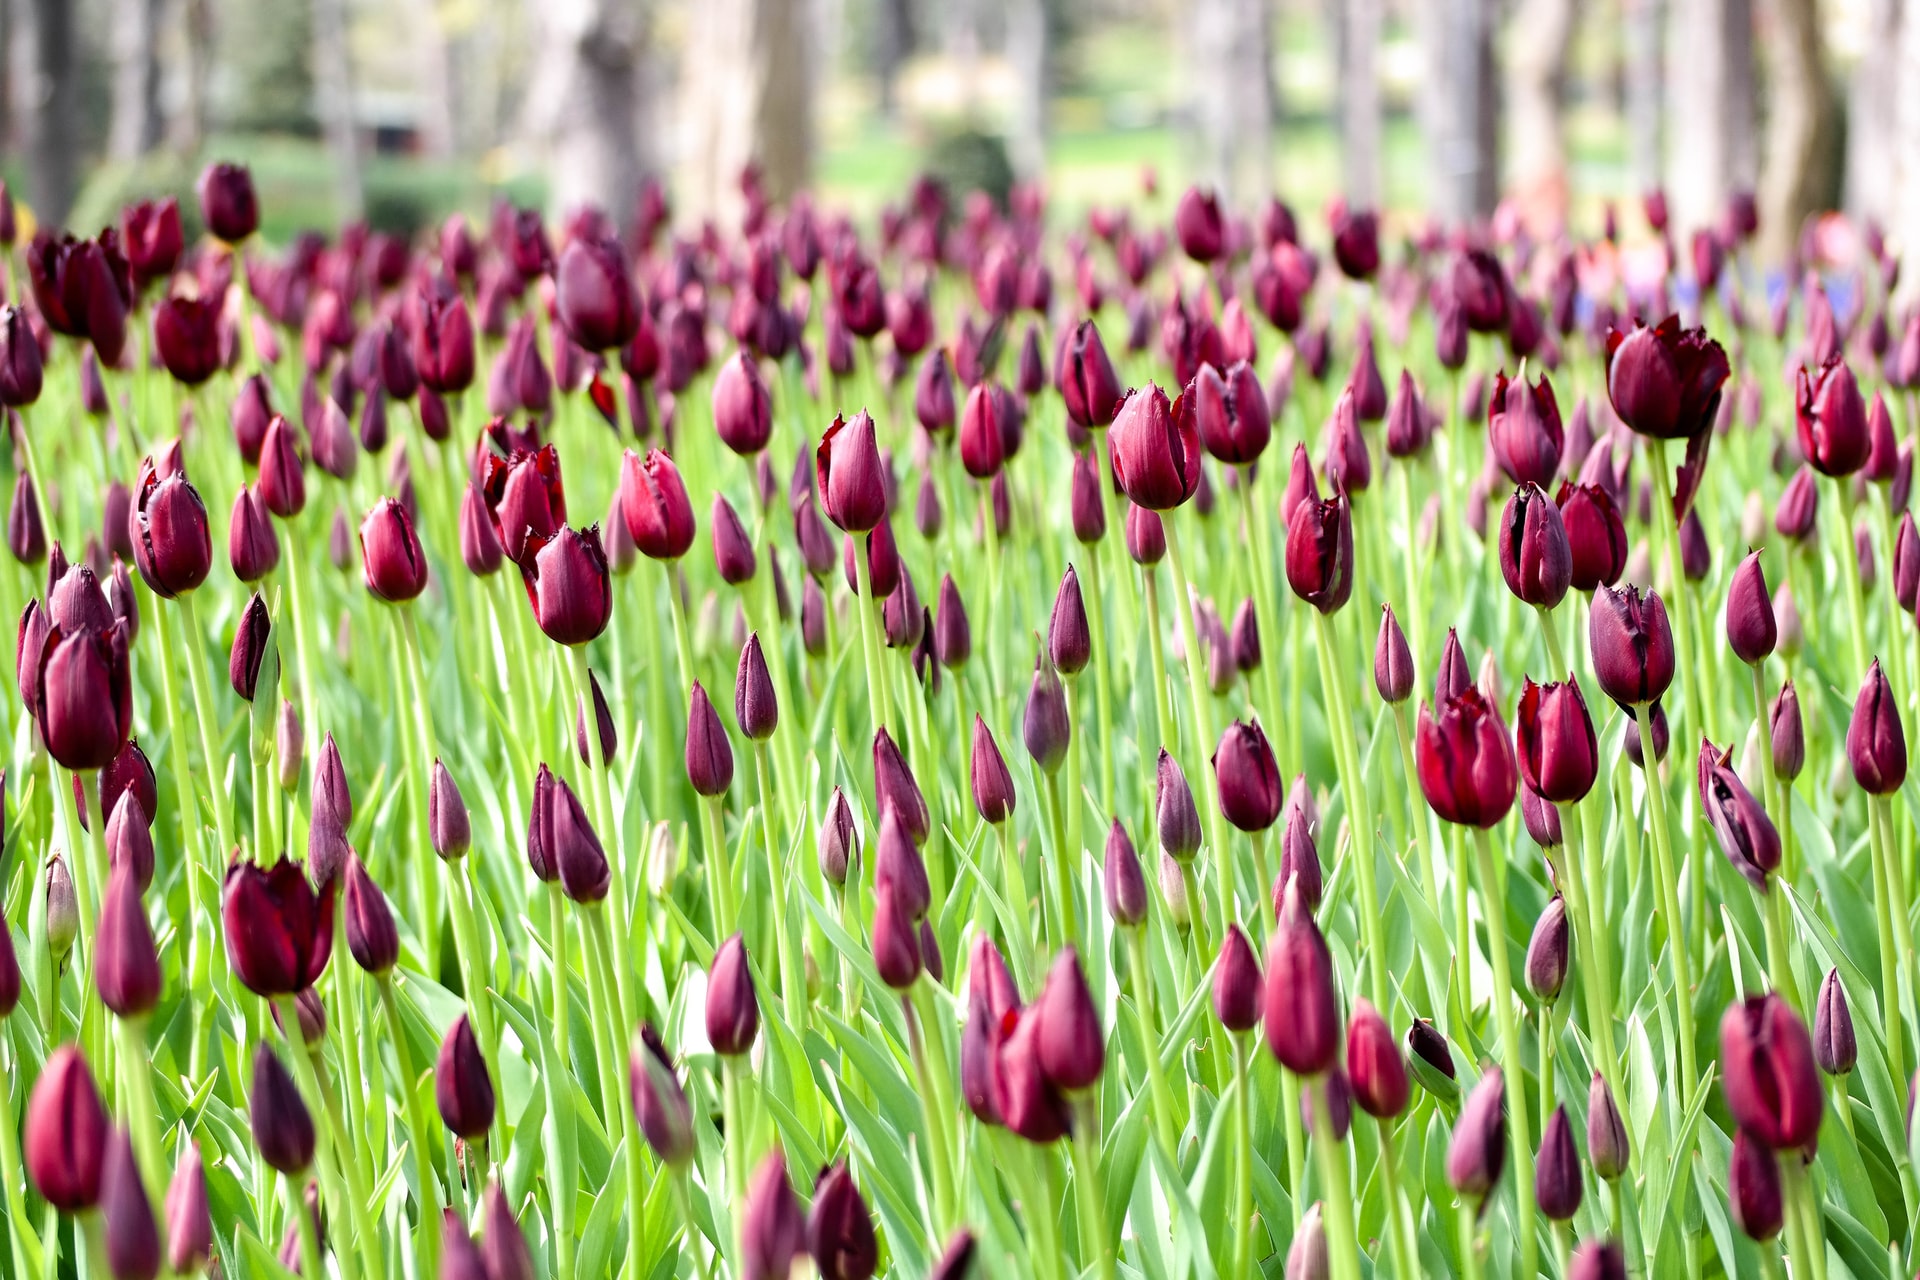 Istanbul Tulip Festival - 2023 - Best Locations for Photography